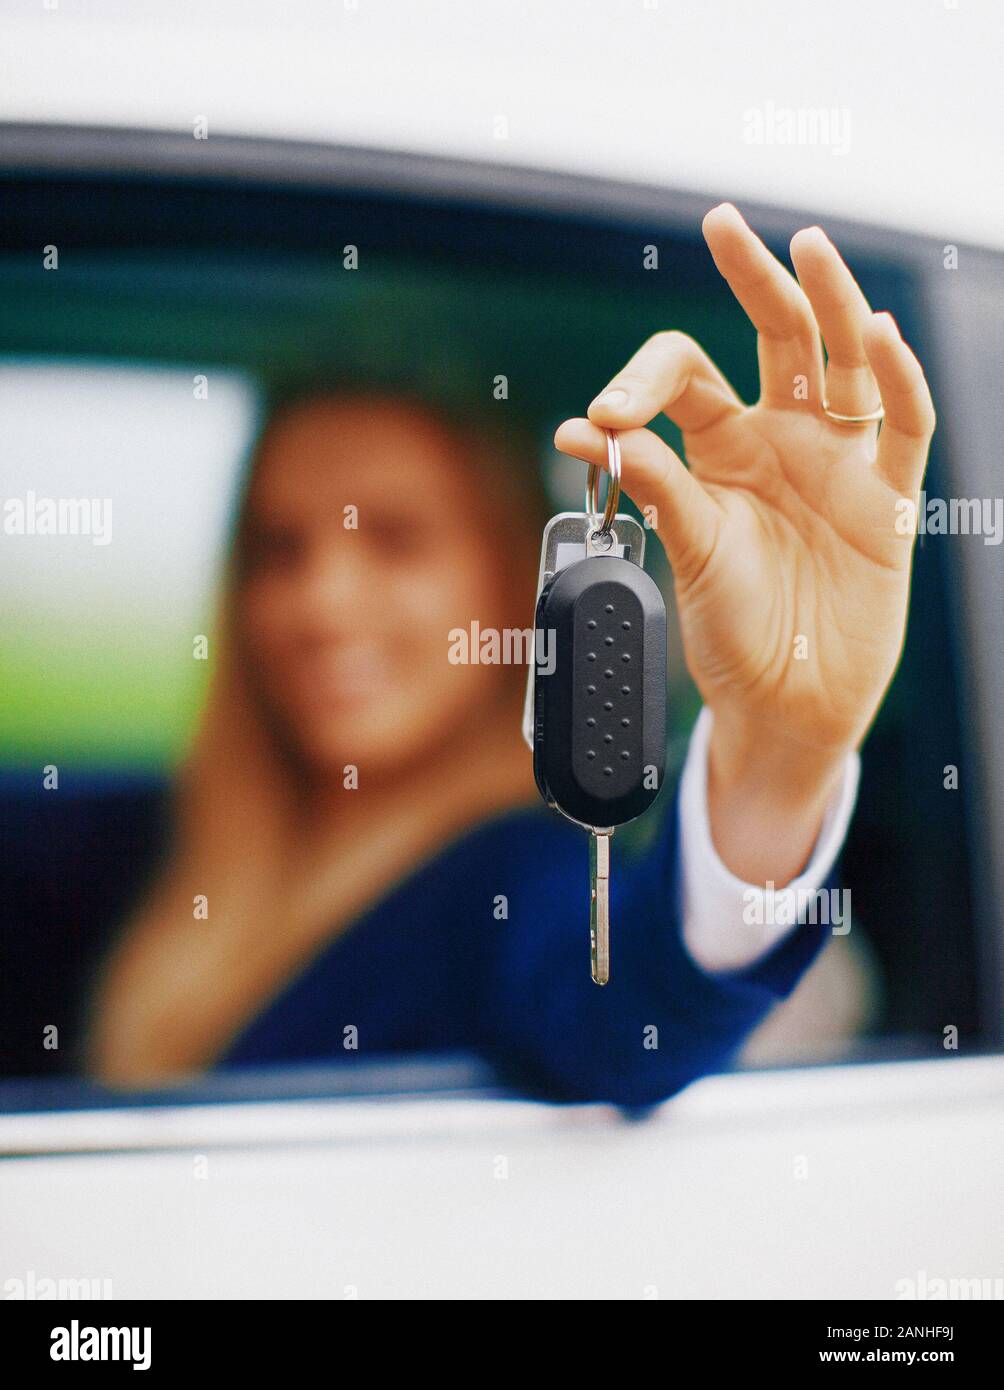 Young blonde woman in her new car smiling. Stock Photo